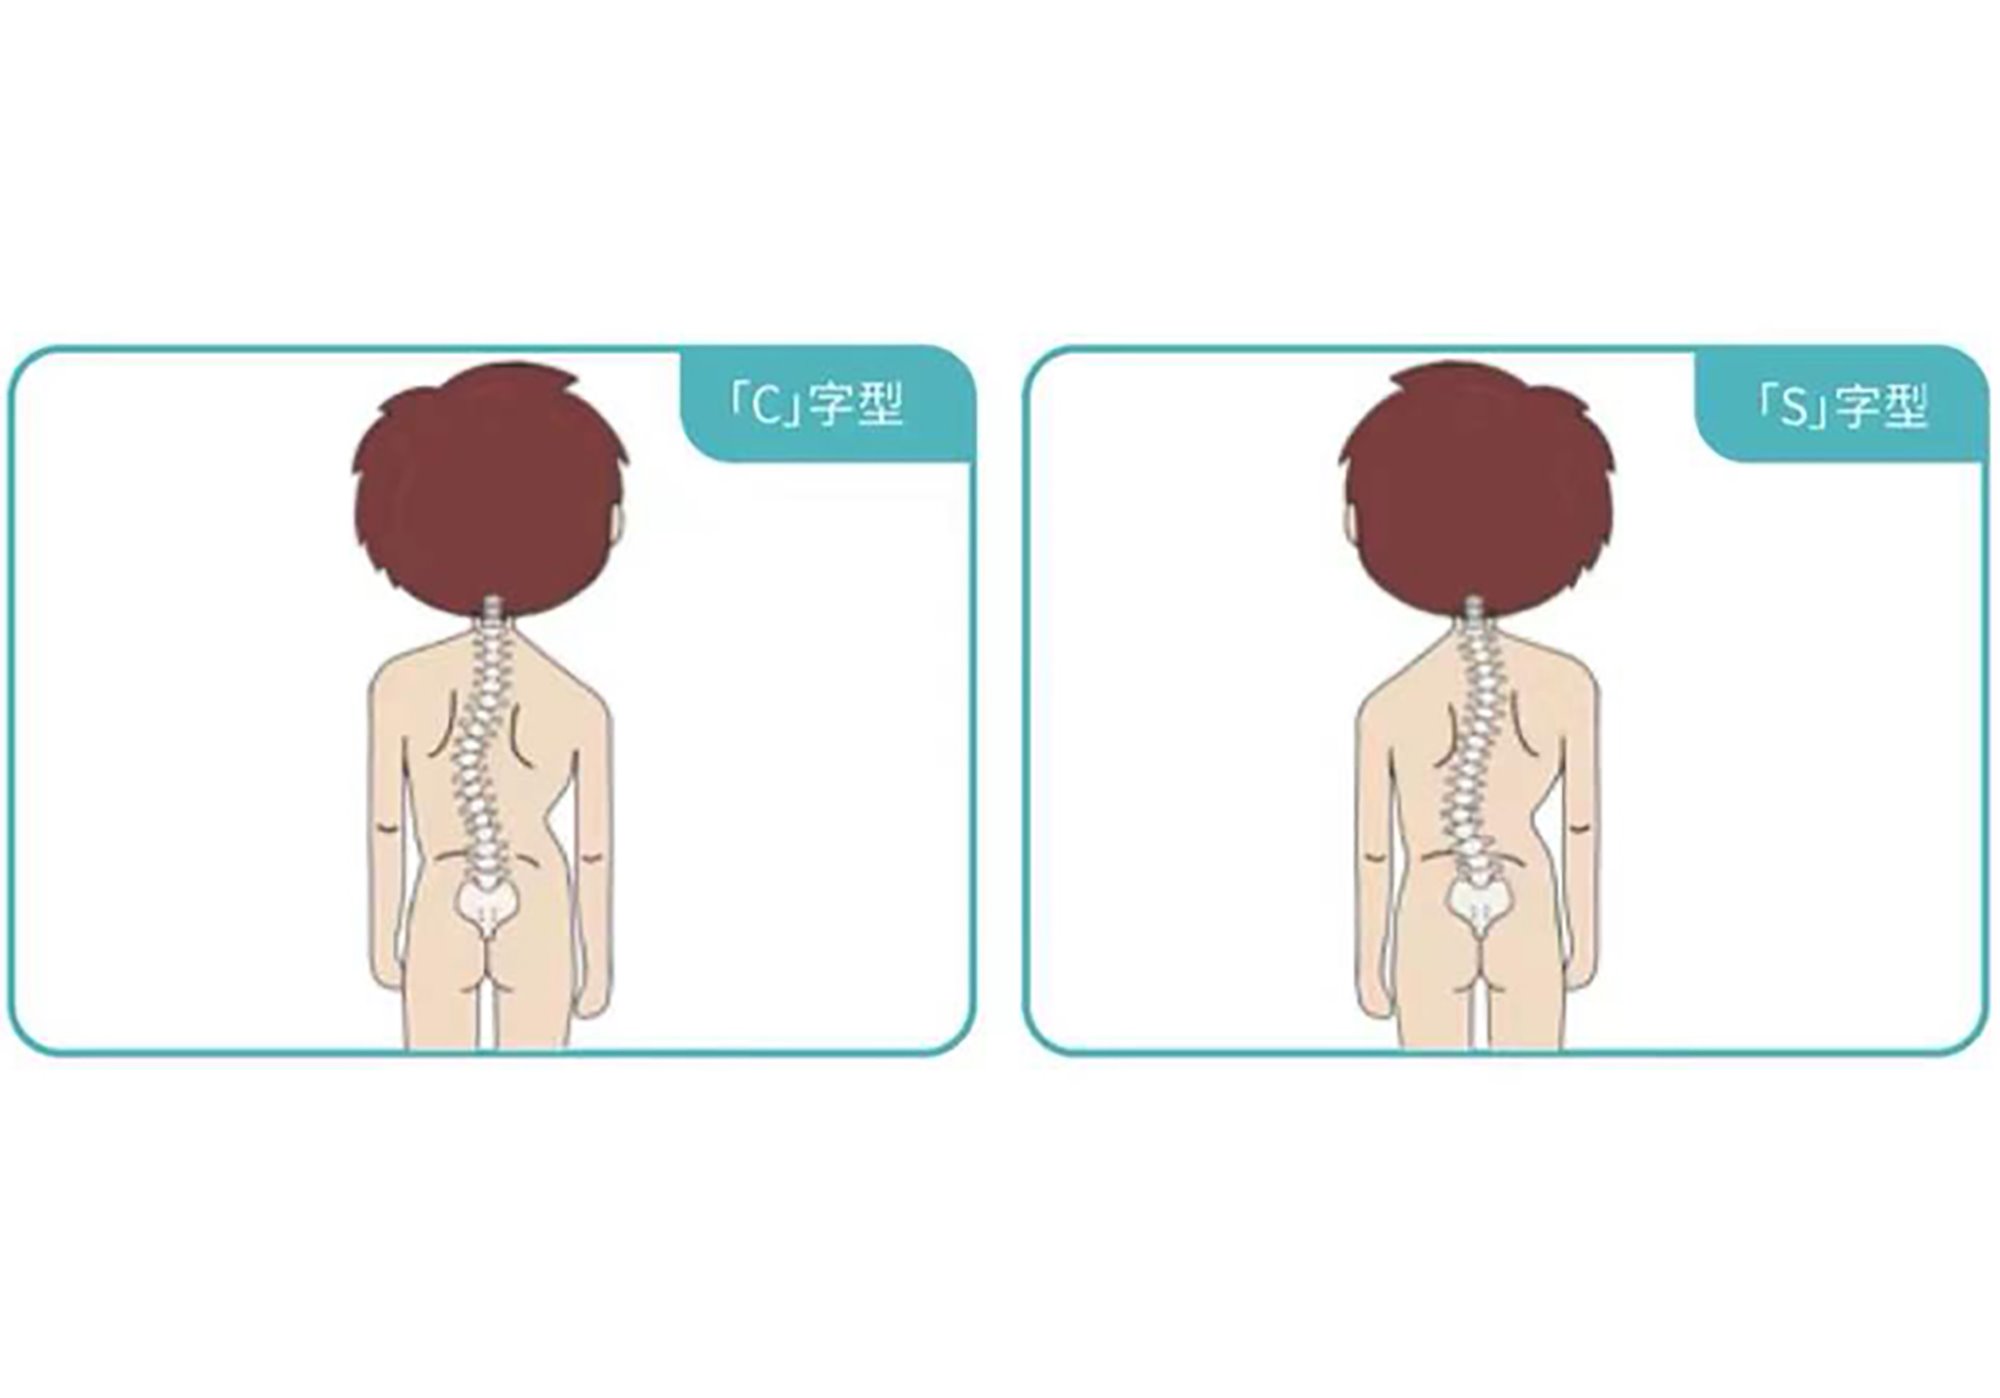 Scoliosis  diagnosis screening has been included in the routine physical examination of students in China